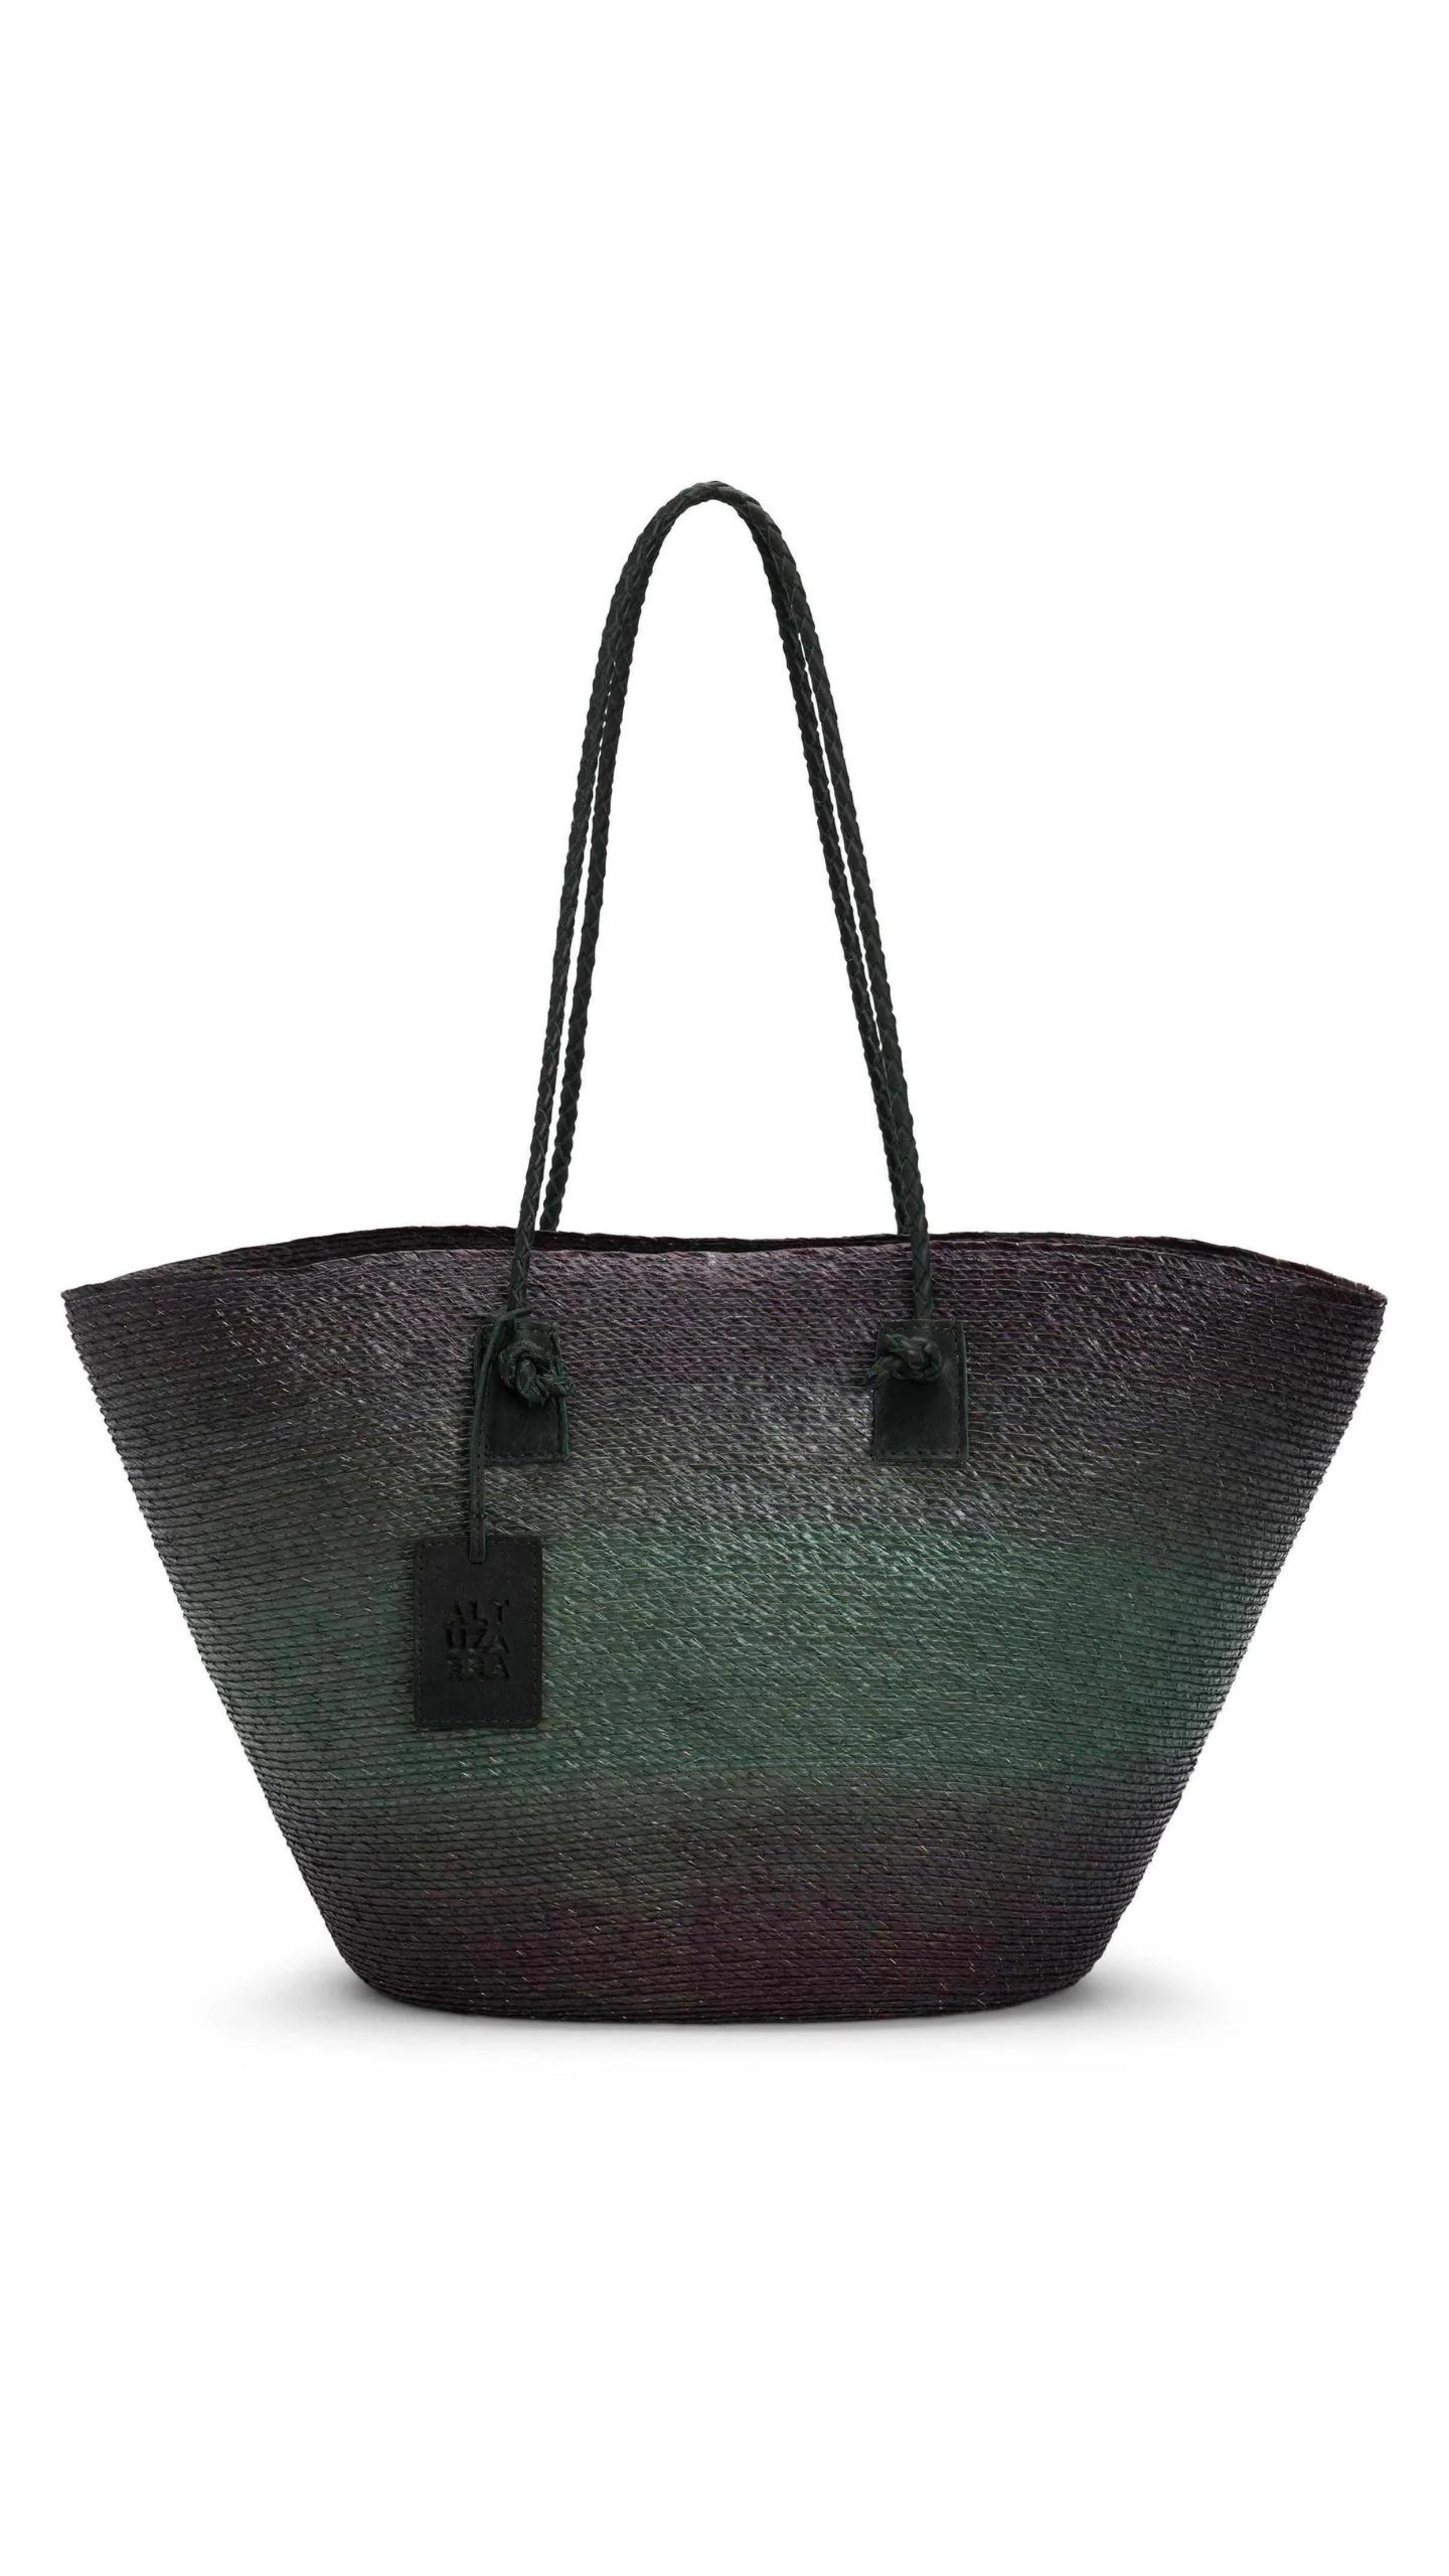 Altruzarra Large Watermill Bag in Campo. A summer raffia tote bag handmade in Mexico. It has a ombre tone with black and green. With a braided leather strap and black leather details. This photo shows the bag from the front view. Available at experience 27 in Madrid Spain. 